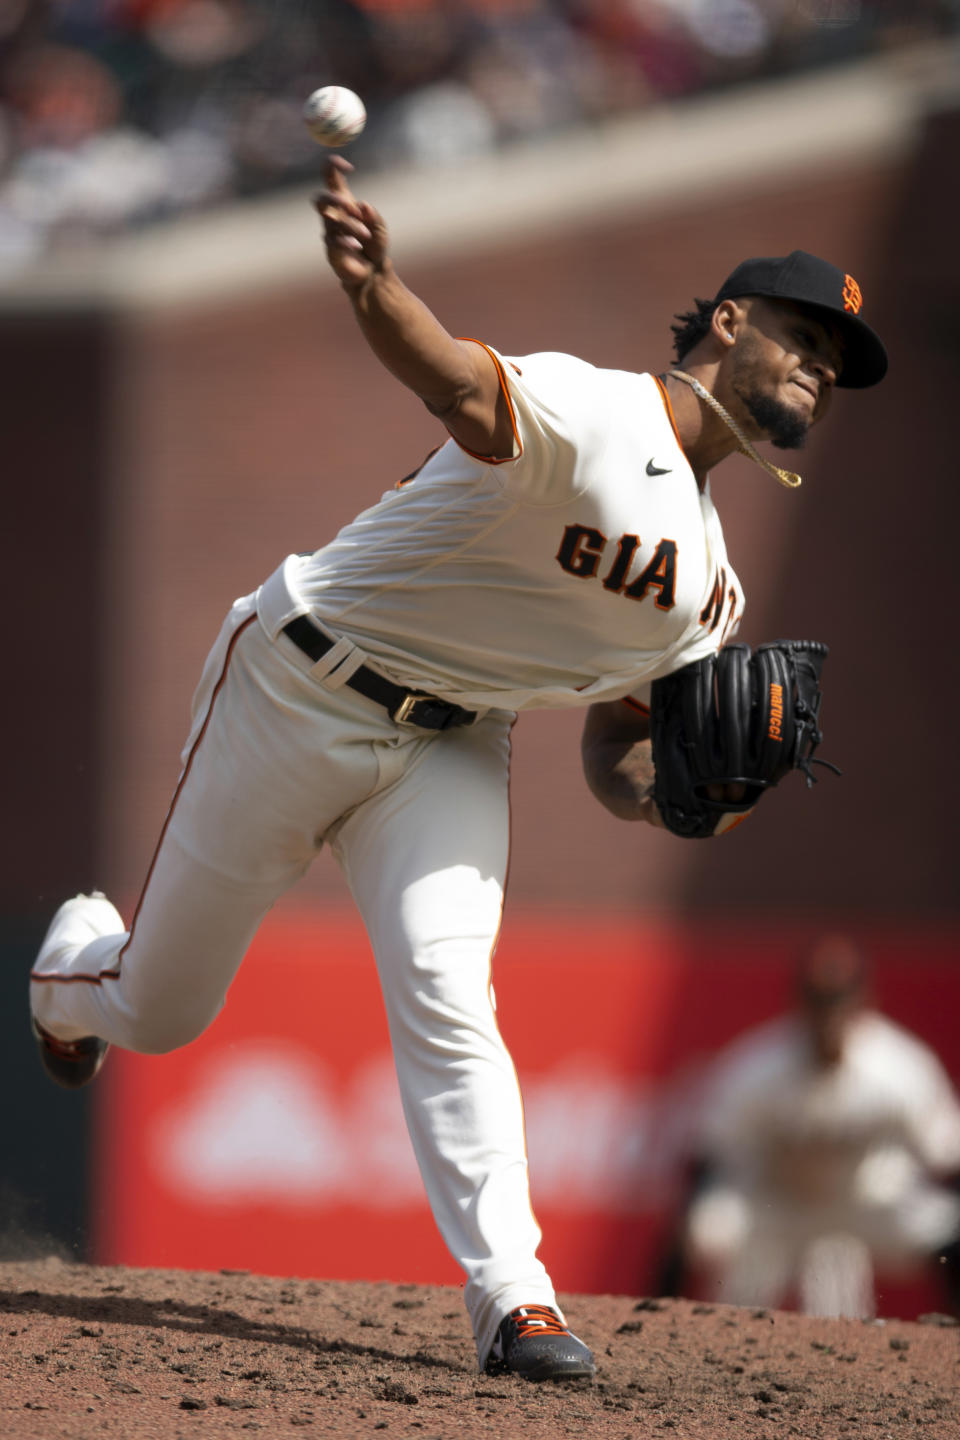 San Francisco Giants pitcher Camilo Doval delivers against the Kansas City Royals during the ninth inning of a baseball game, Saturday, April 8, 2023, in San Francisco. (AP Photo/D. Ross Cameron)